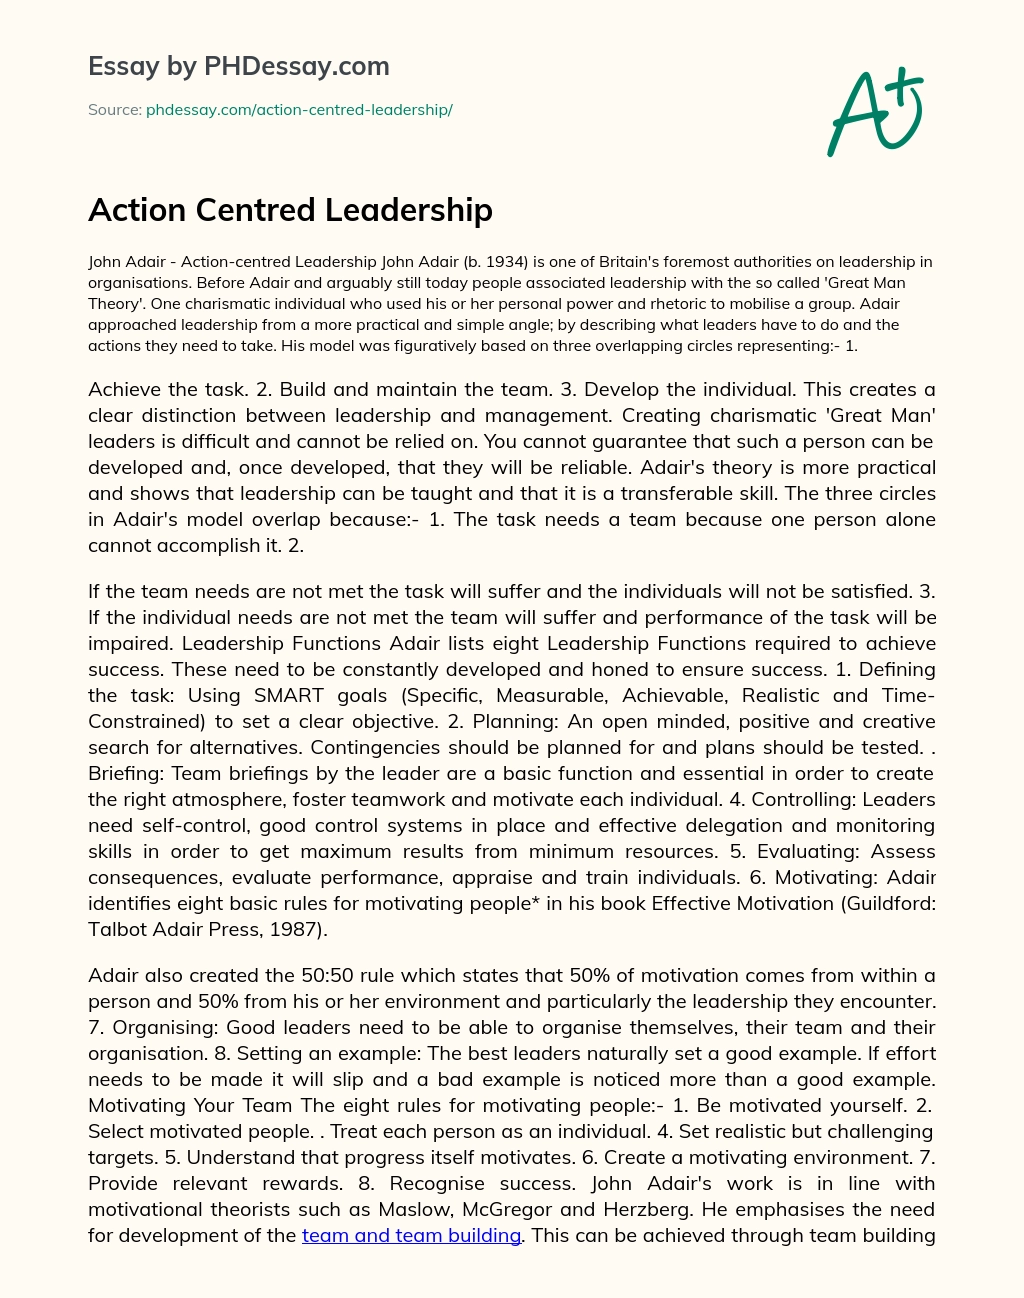 Action Centred Leadership essay